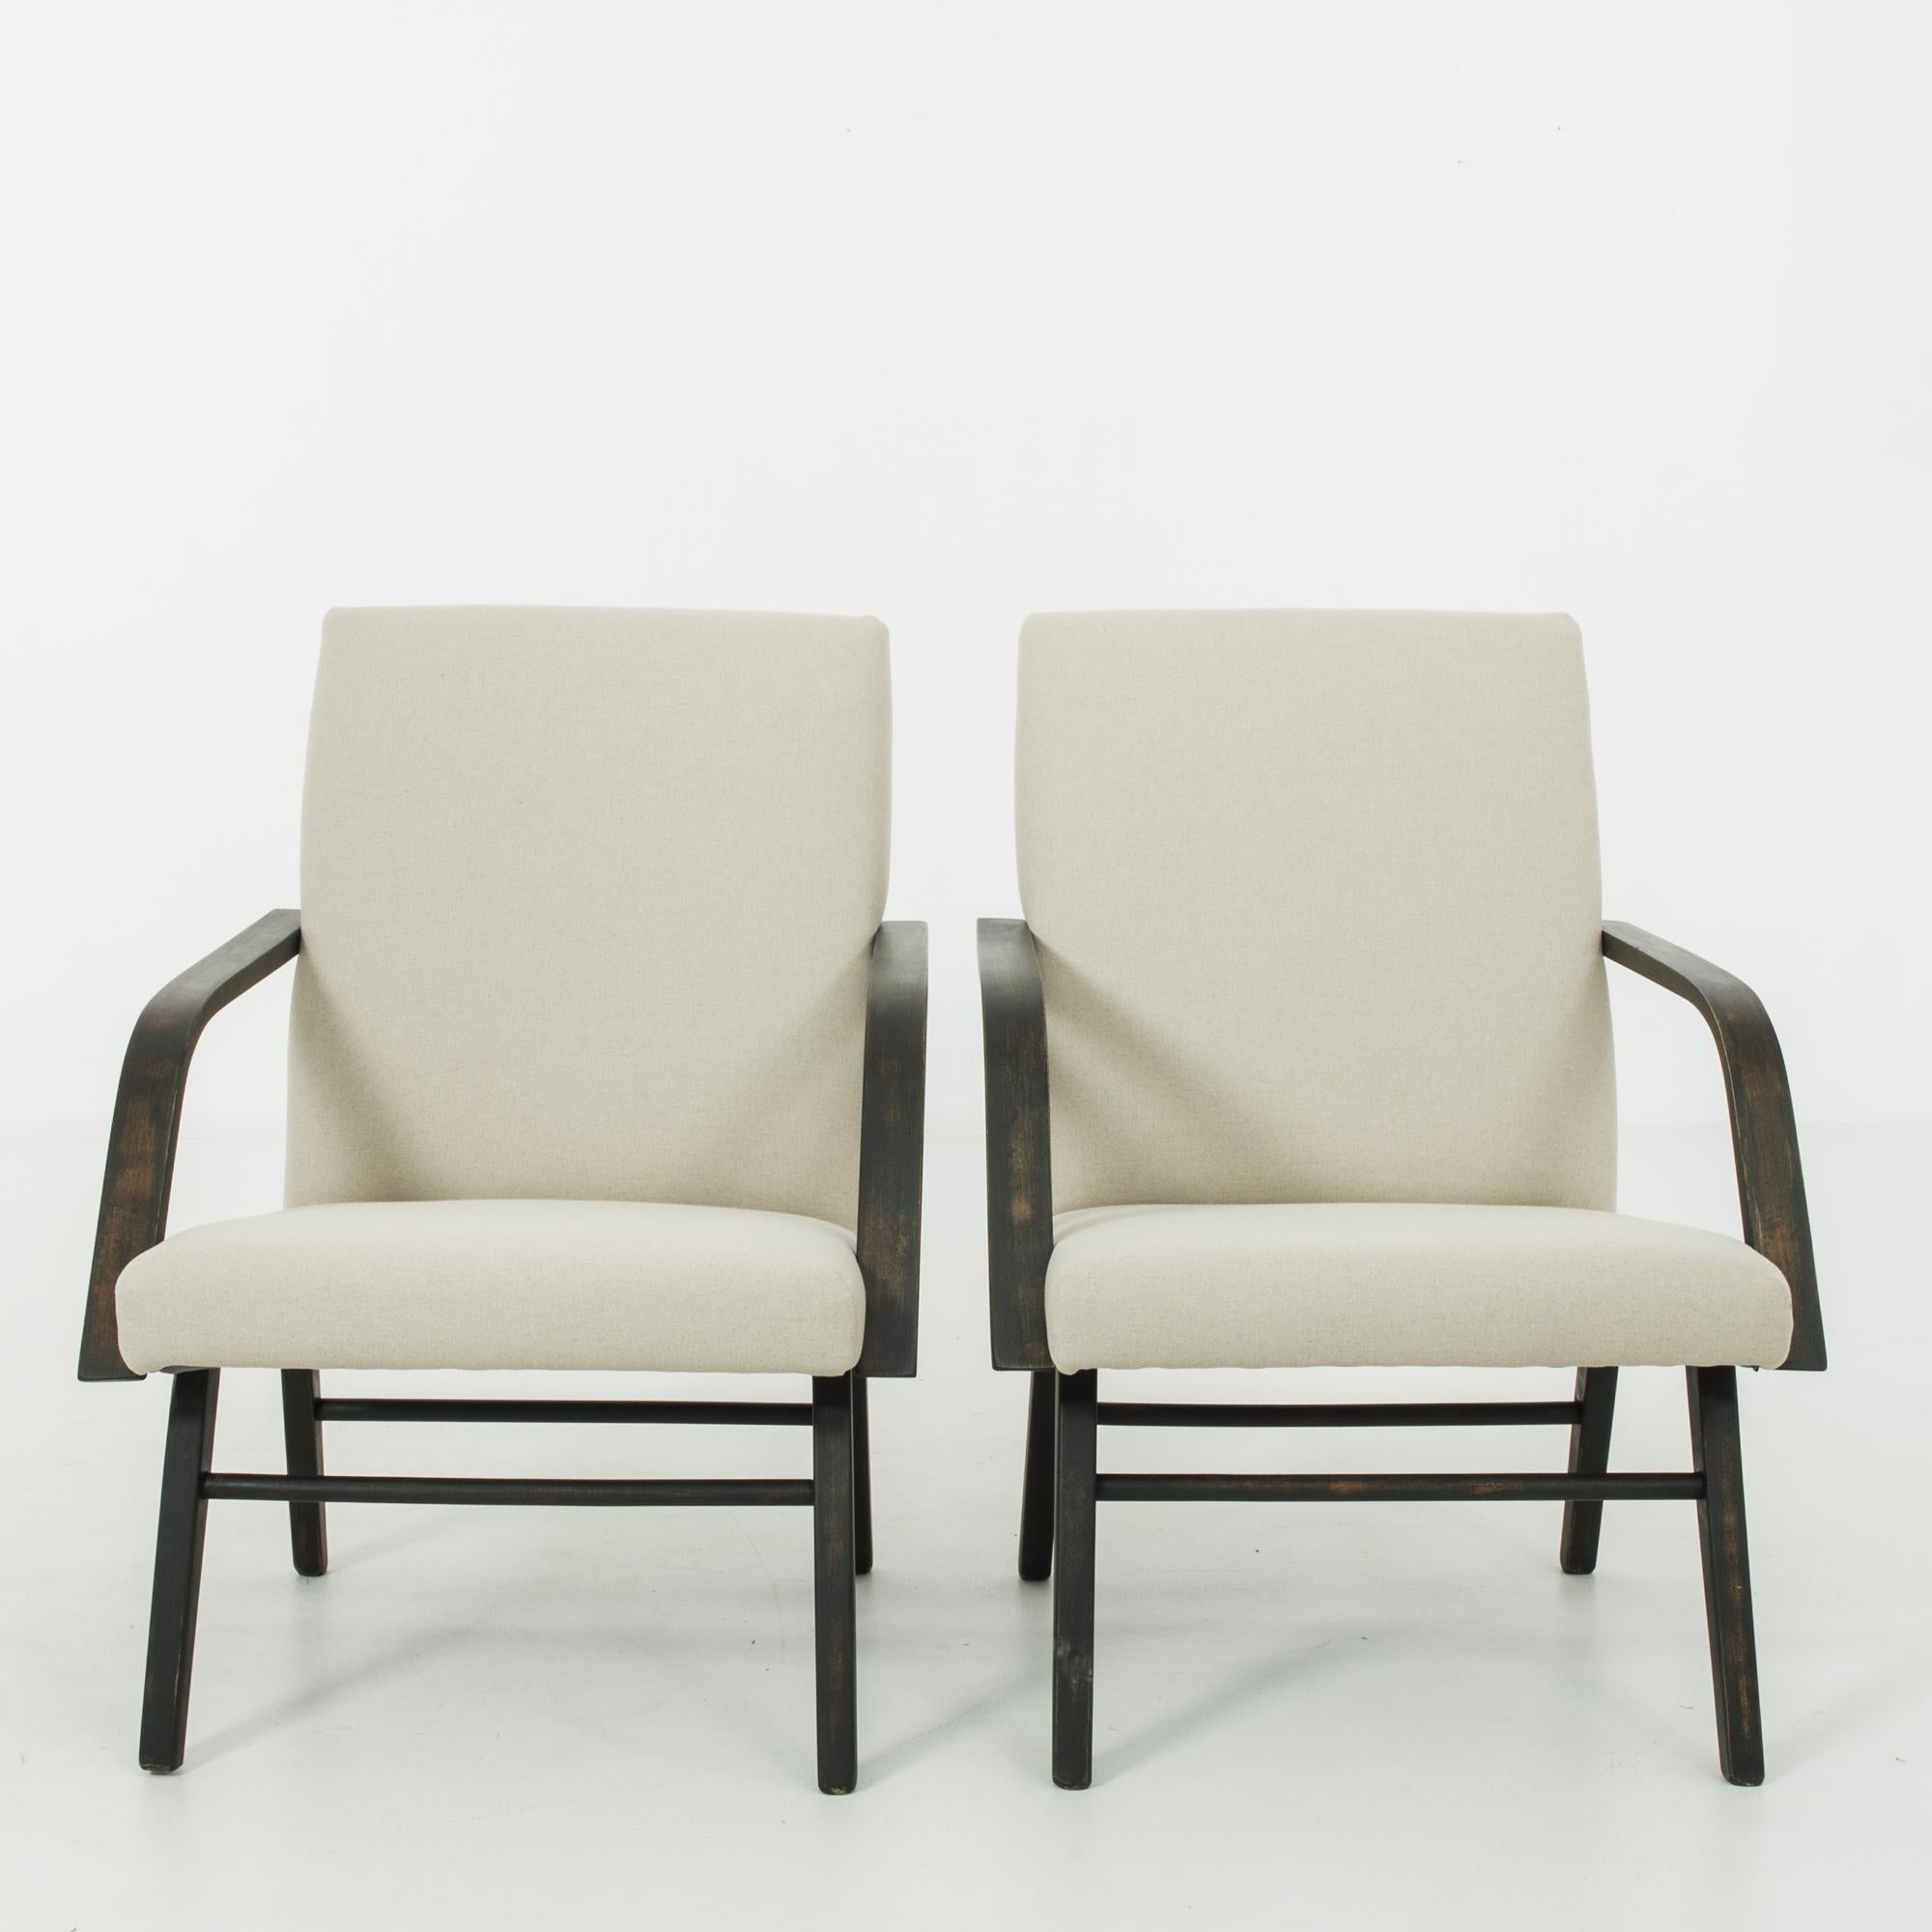 This pair of upholstered wooden armchairs was made in Czechoslovakia, circa 1960. Distinctive angular armrests and tapered, splayed legs give the chairs a contemplative silhouette, underscored by geometric seat cushions. The newly upholstered seats